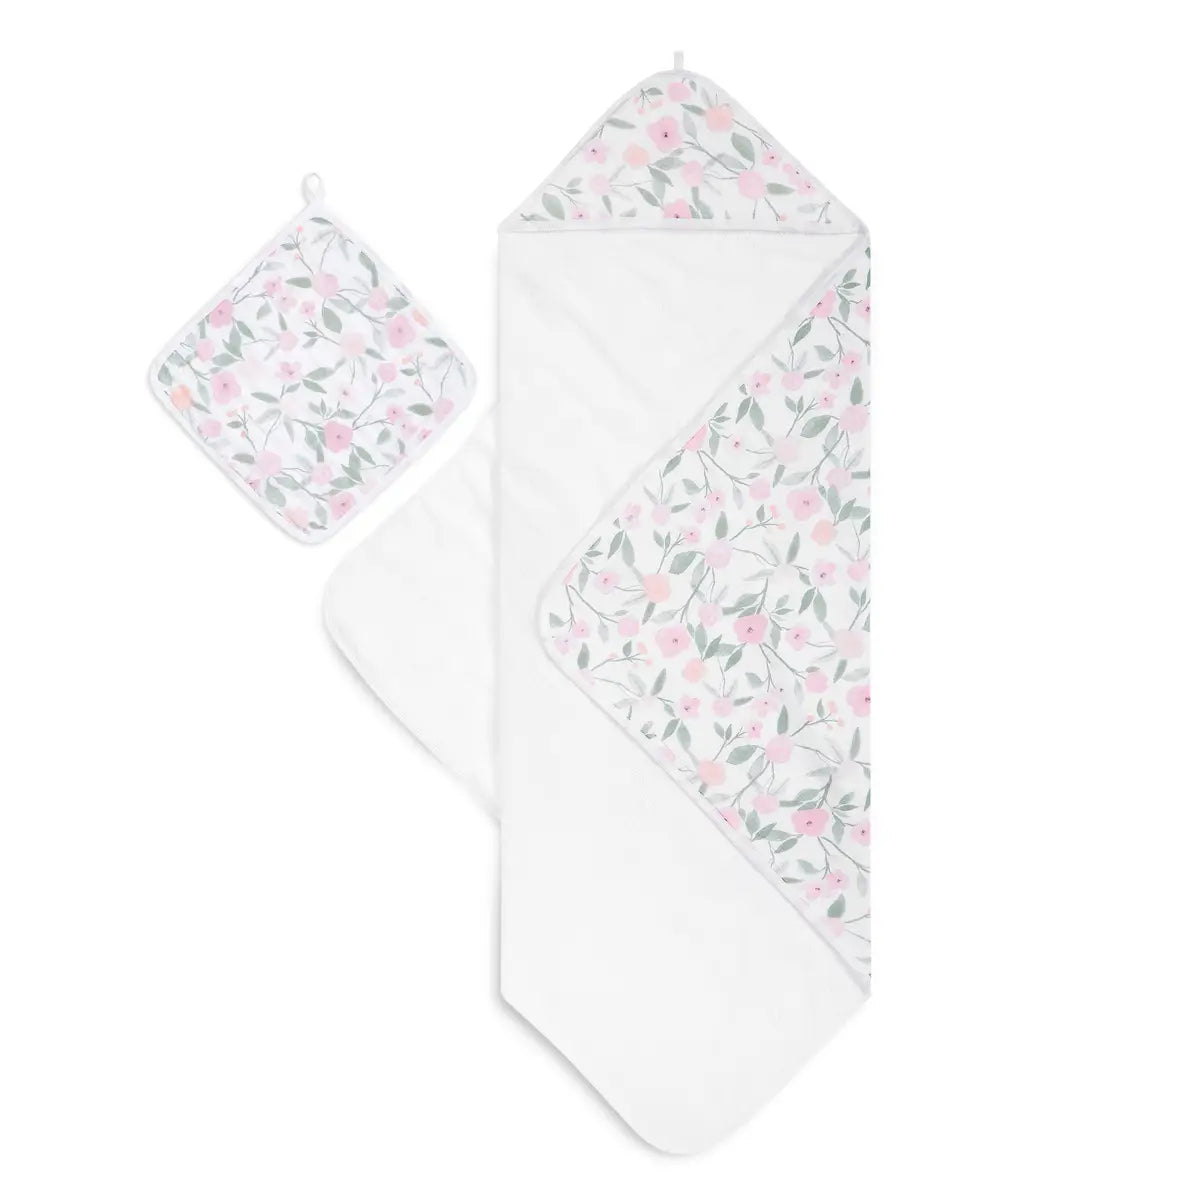 Aden and Anais Cotton Muslin Hooded Towel and Washcloth